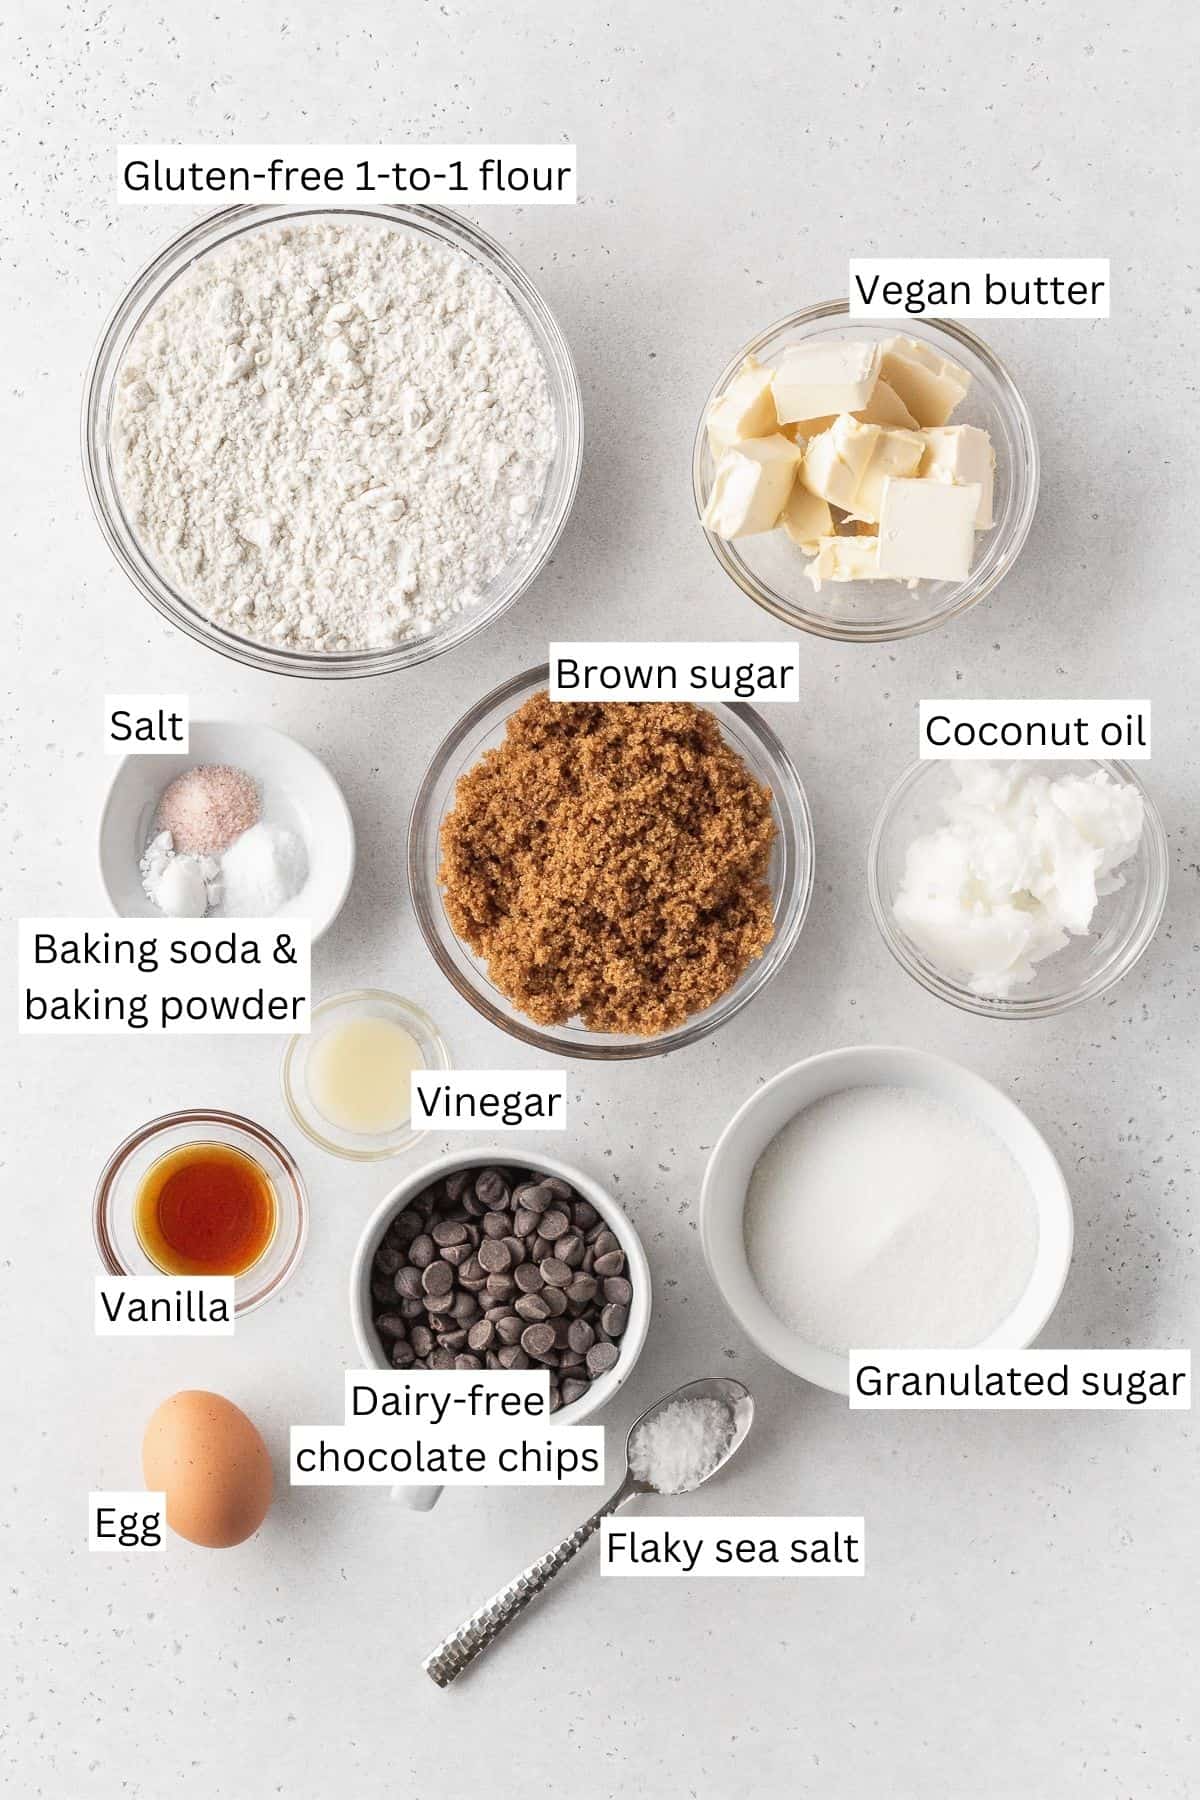 ingredients for making gluten-free dairy-free chocolate chip cookies laid out on a table with text overlay.